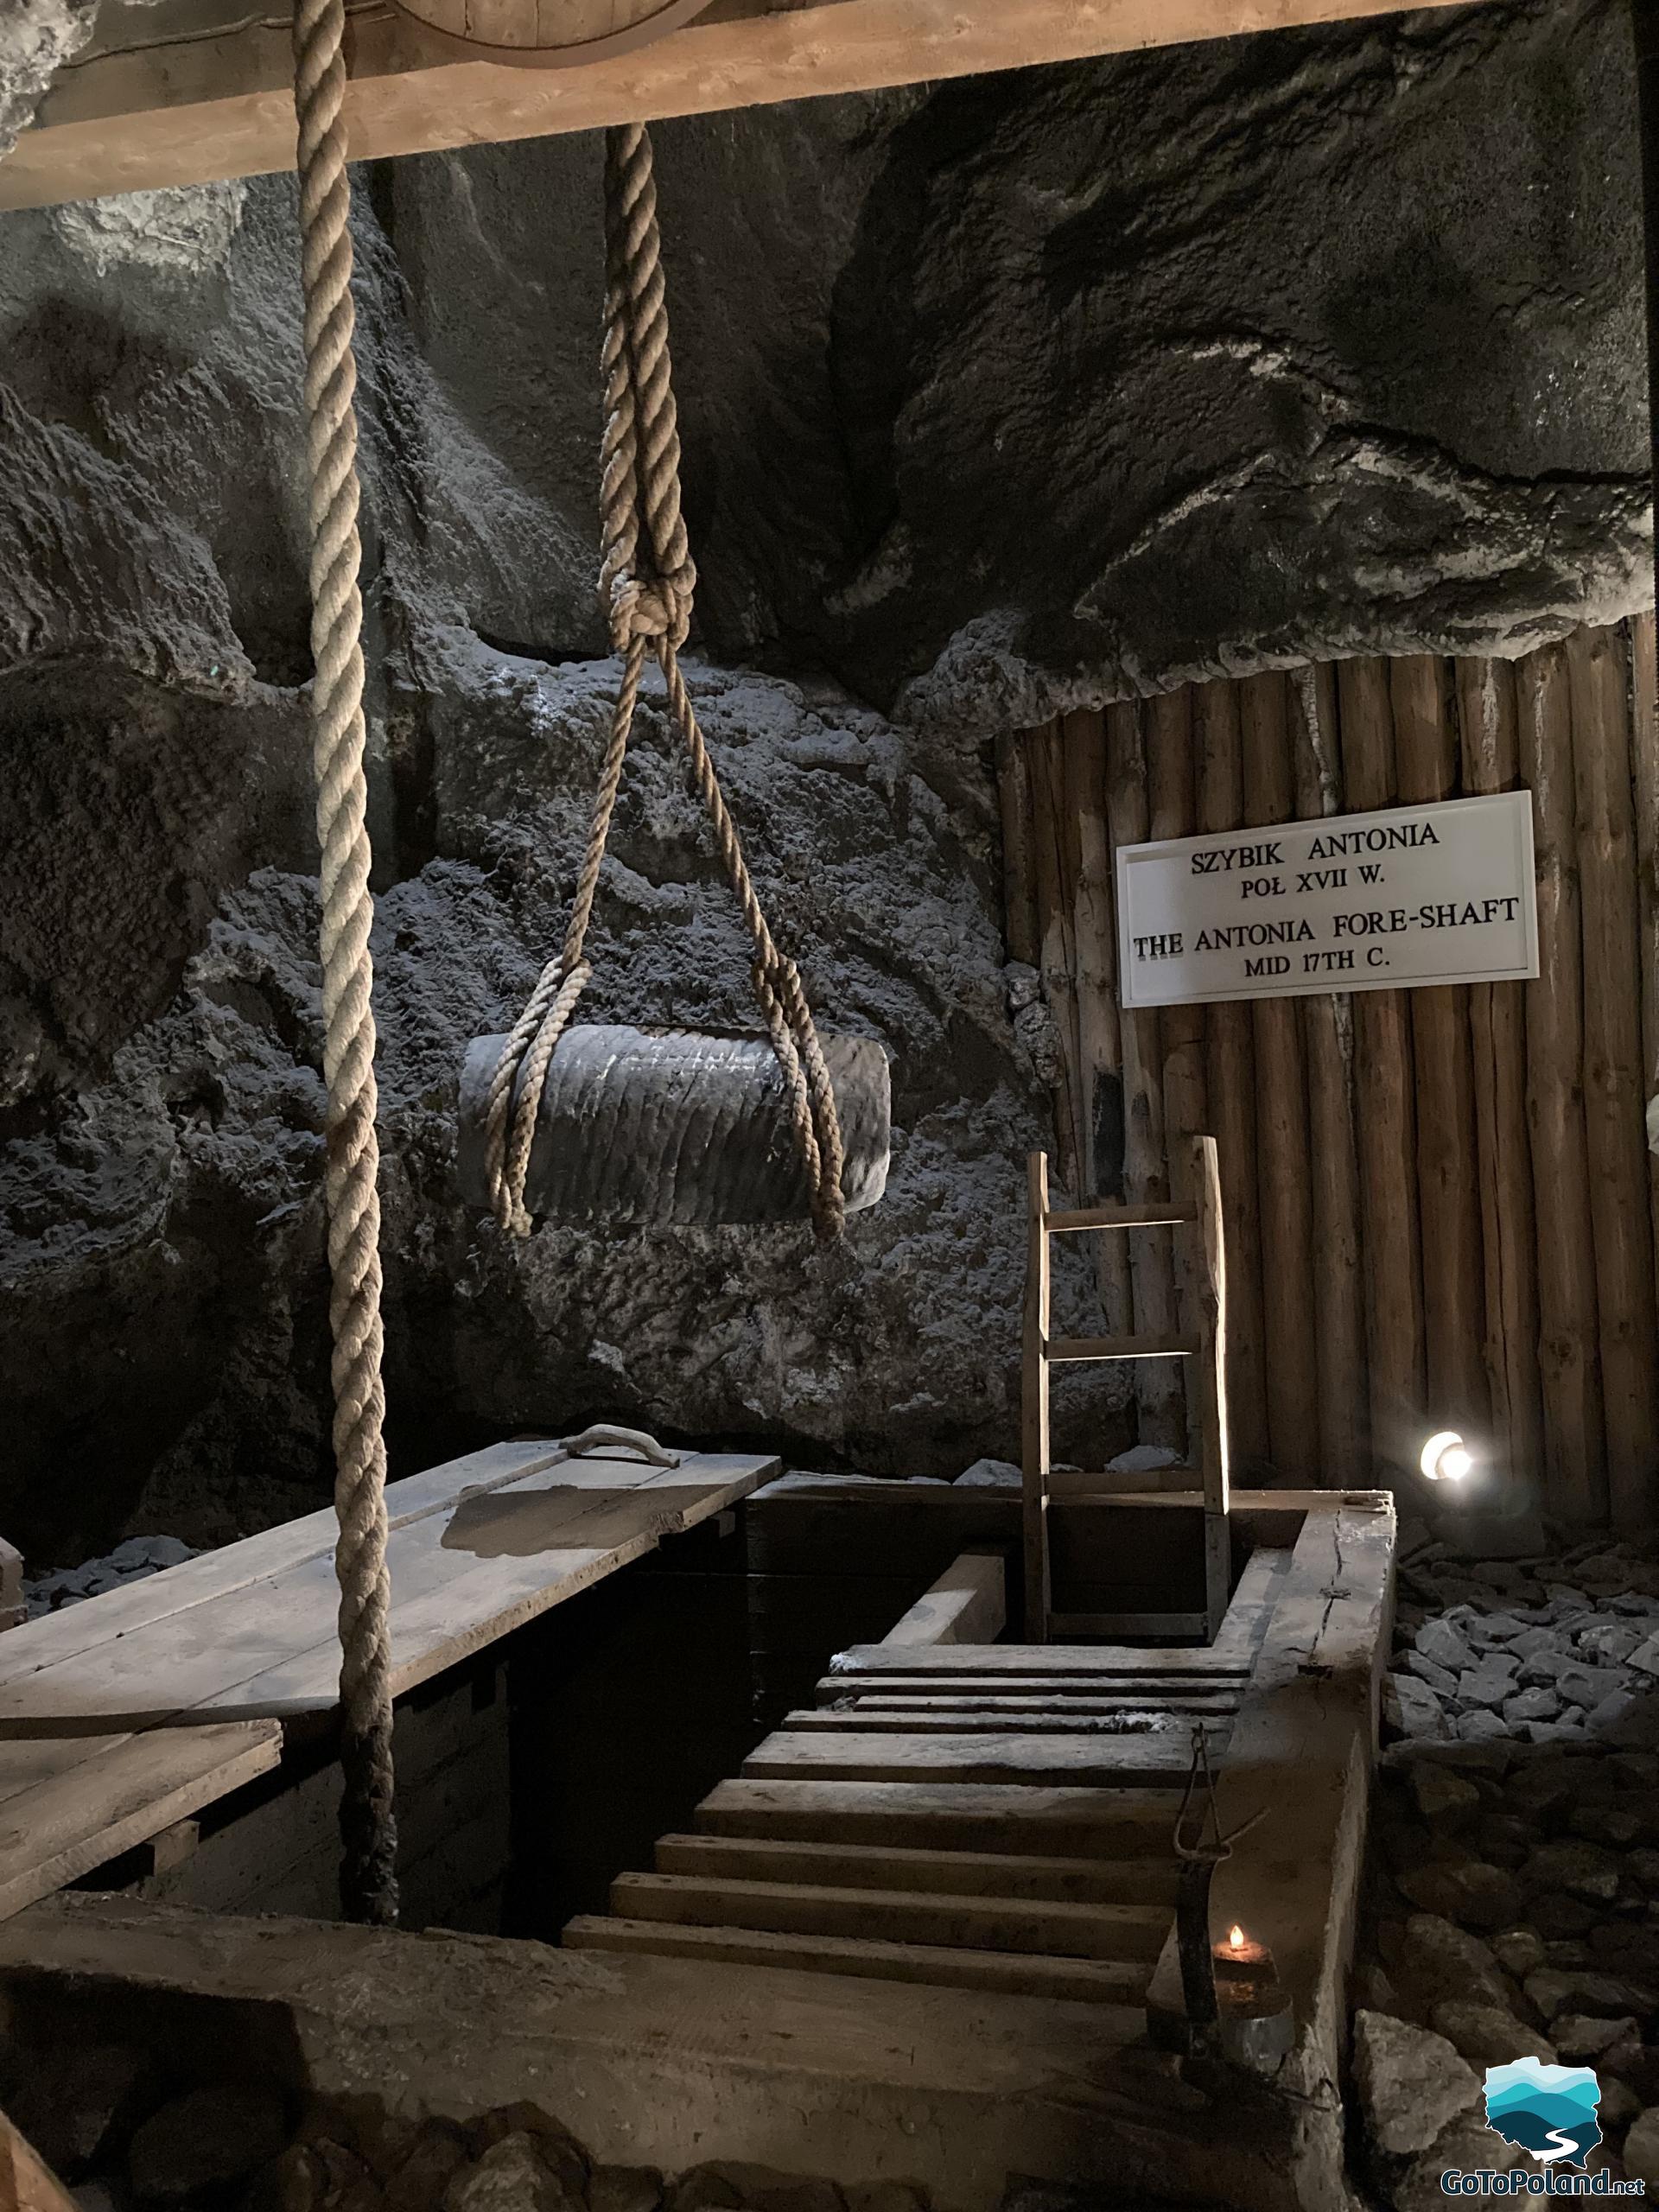 a mining shaft in a salt mine, some ropes and a ladder, walls of salt